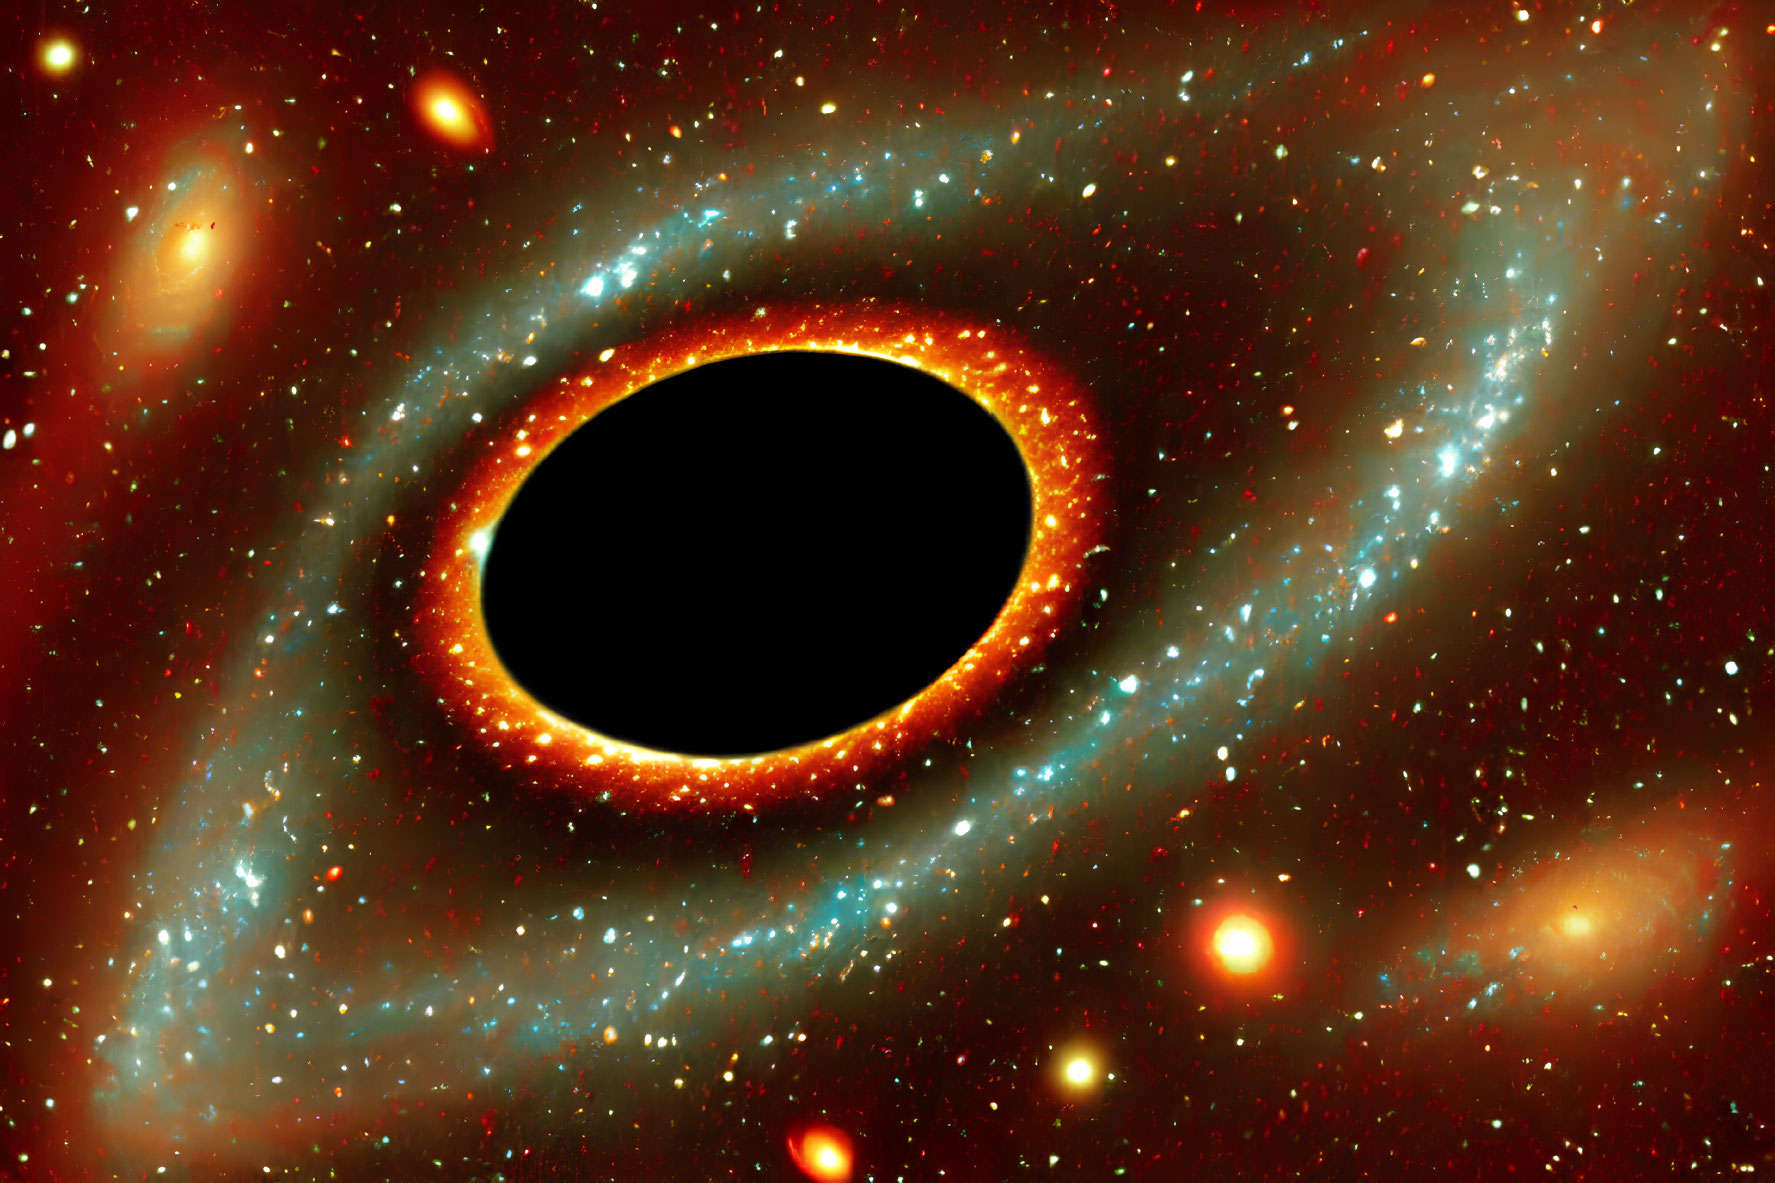 Stunning Space Image: Black Hole with Swirling Accretion Disk